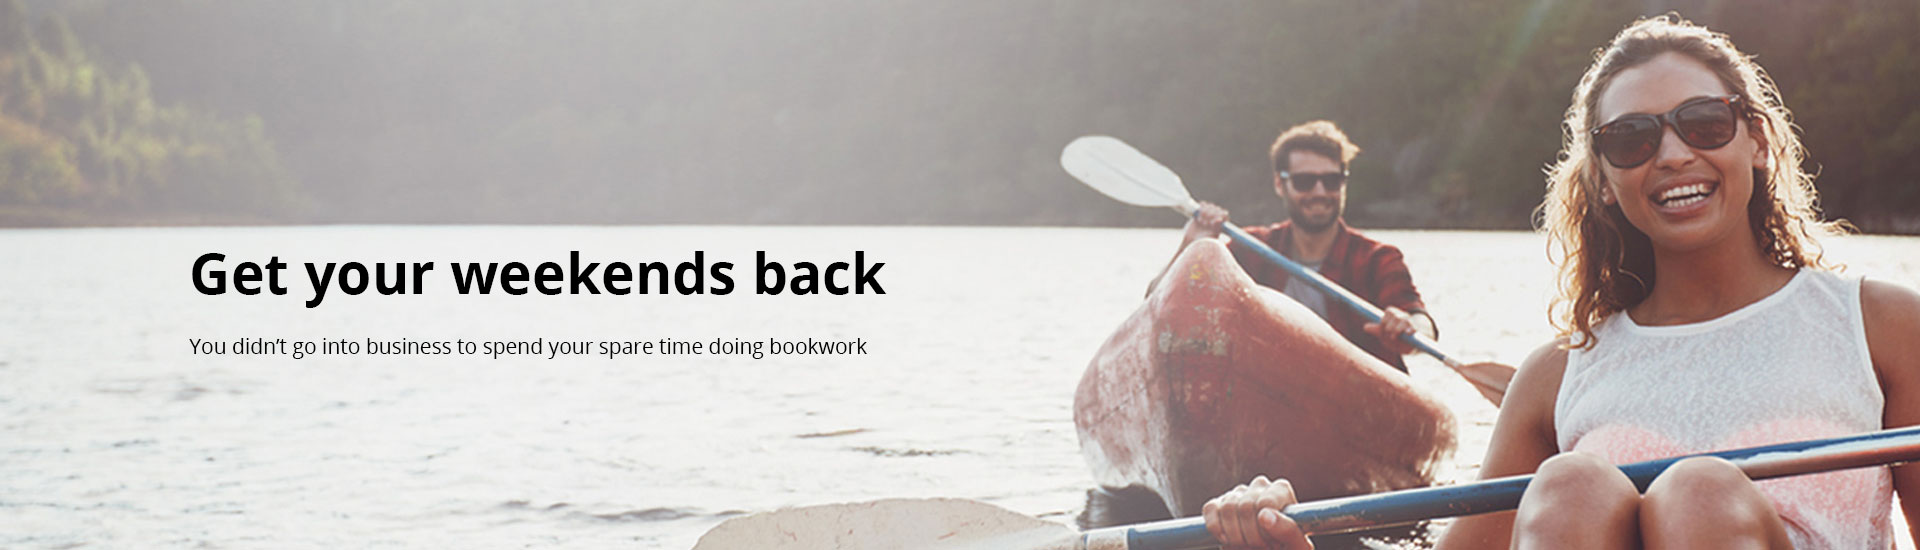 Get your weekends back. You didn't go into business to spend your spare time doing bookwork